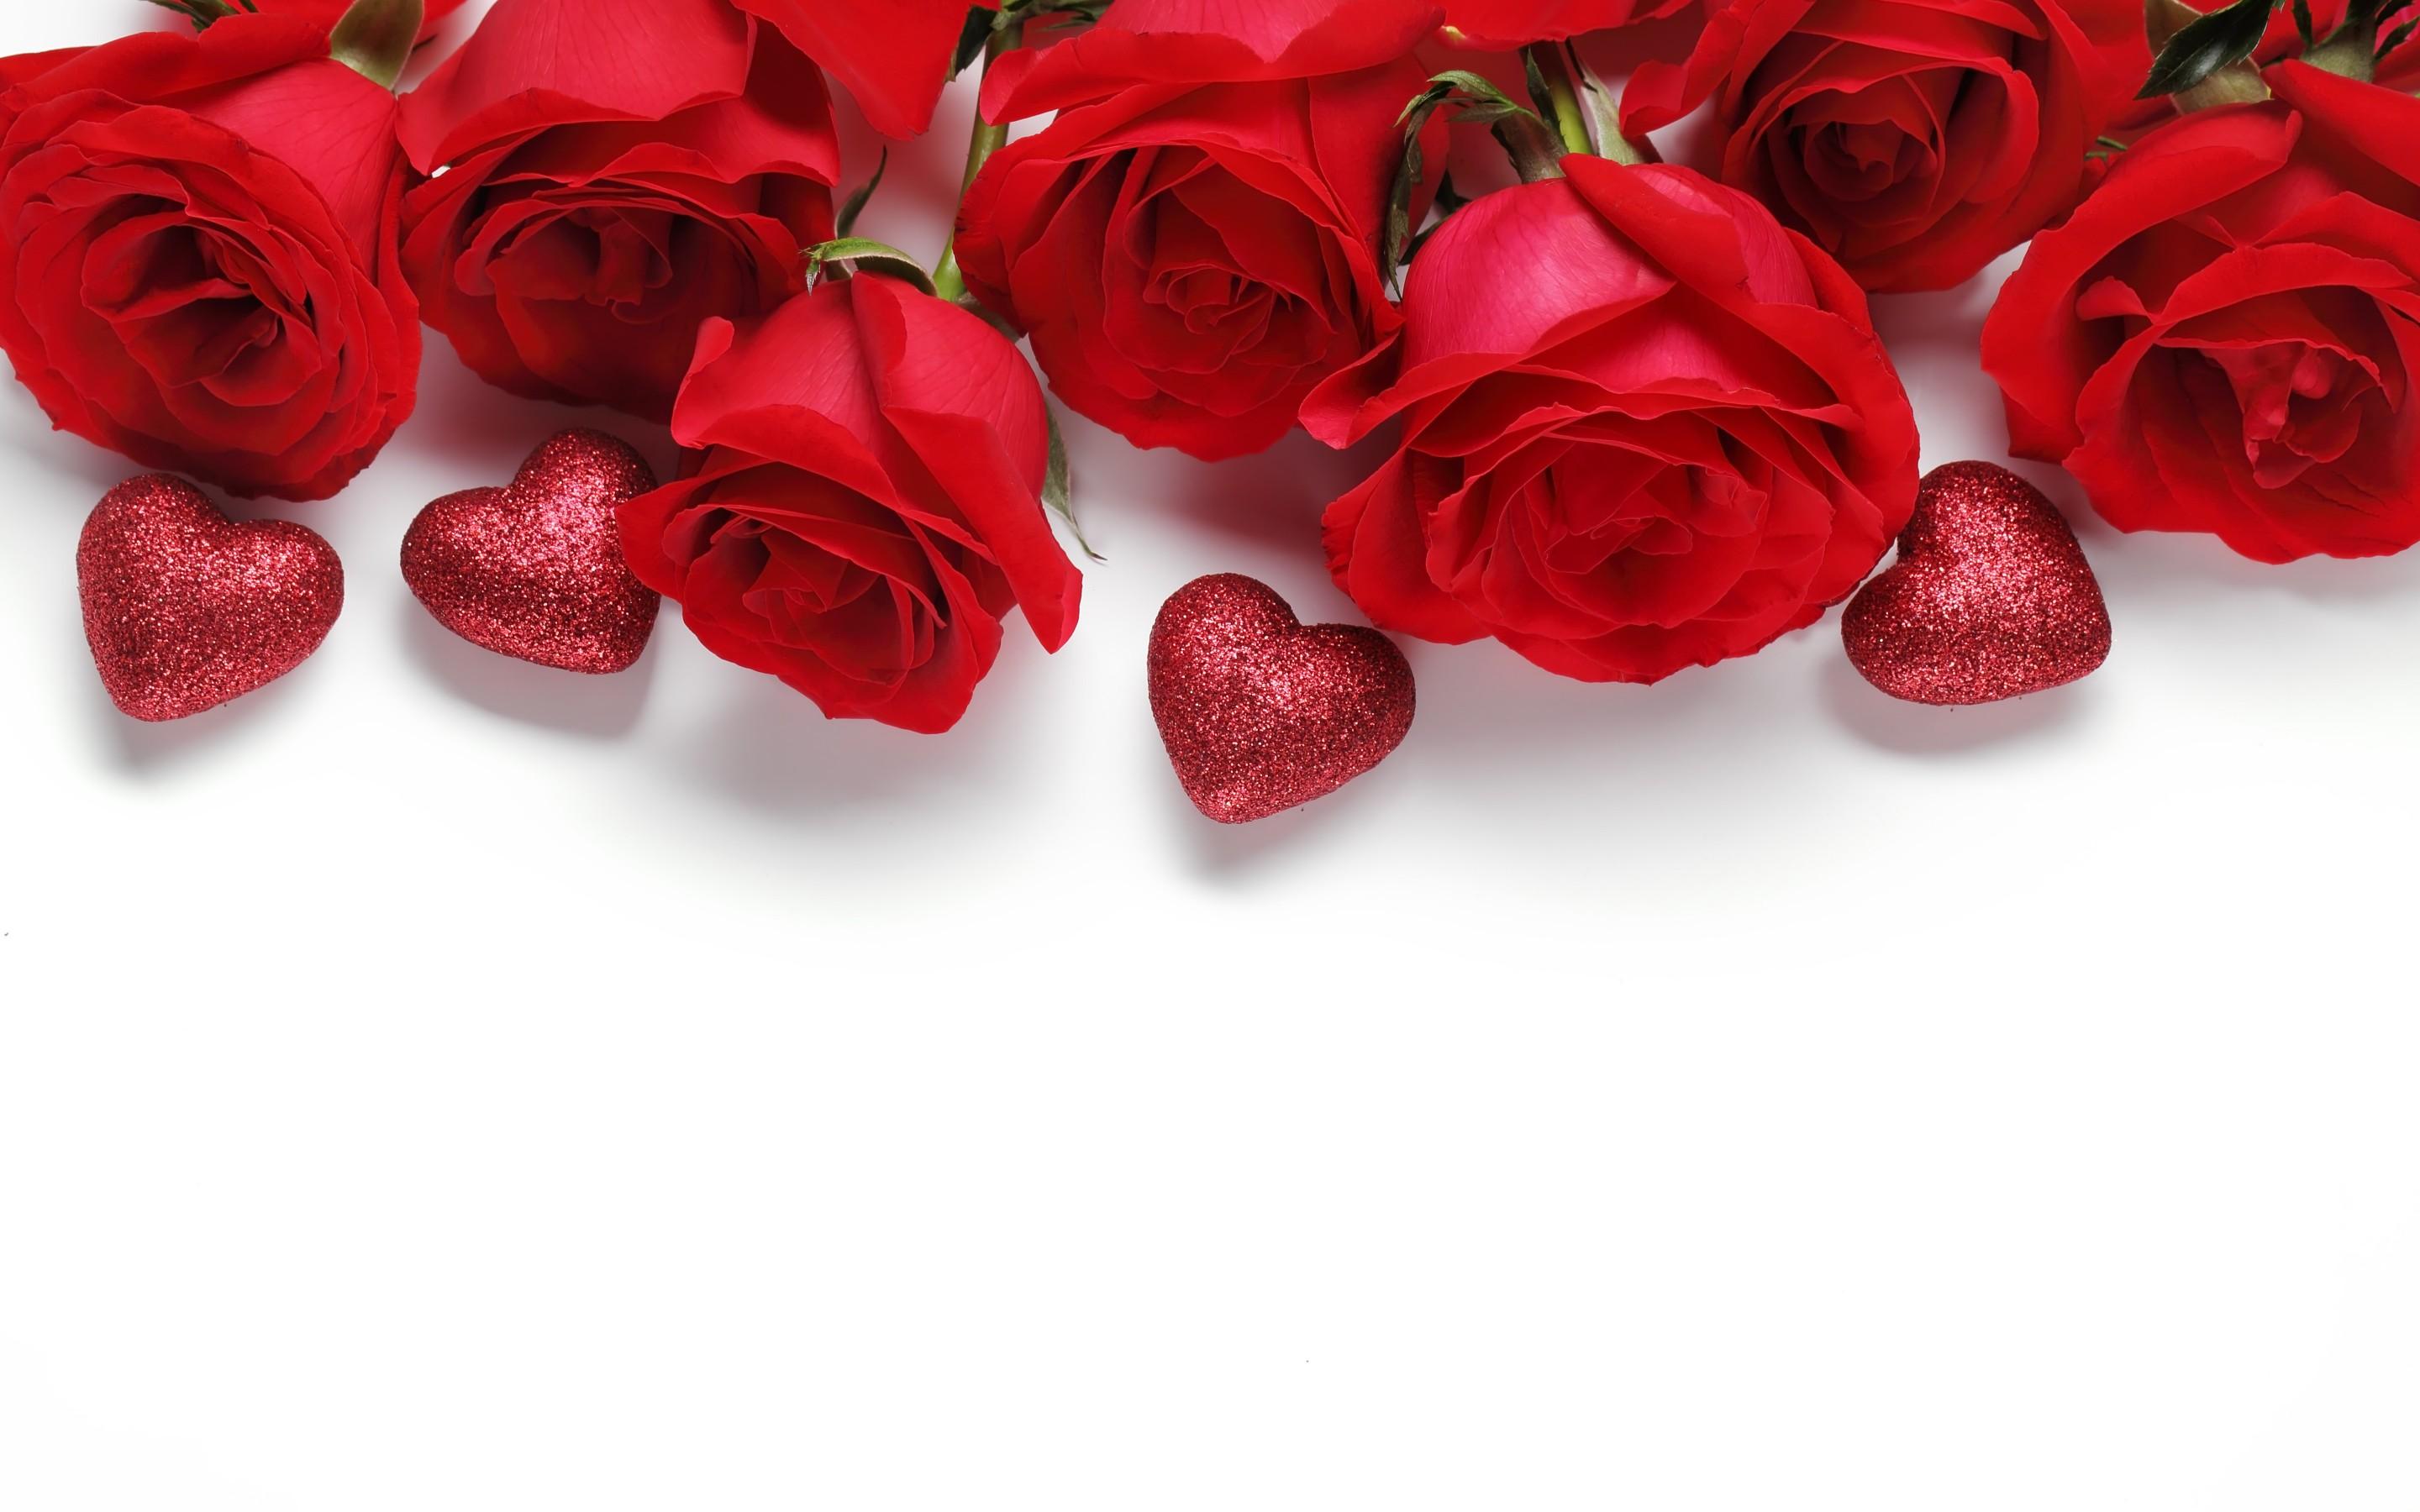 Red Roses And Hearts Wallpaper Red Roses And Hearts